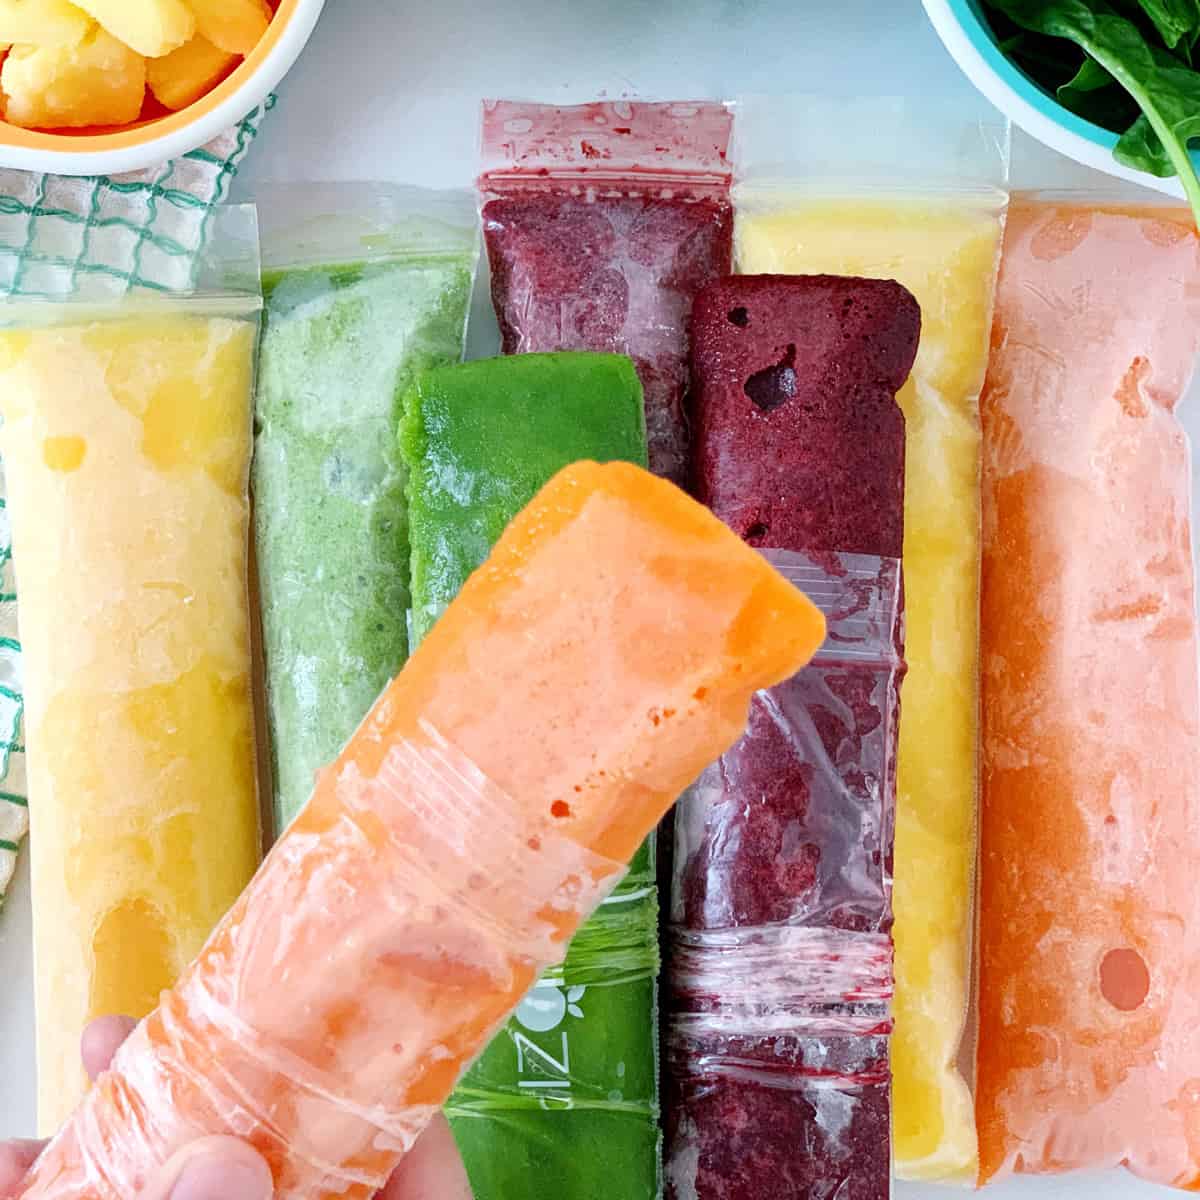 How to Make Fruit and Vegetable Popsicles